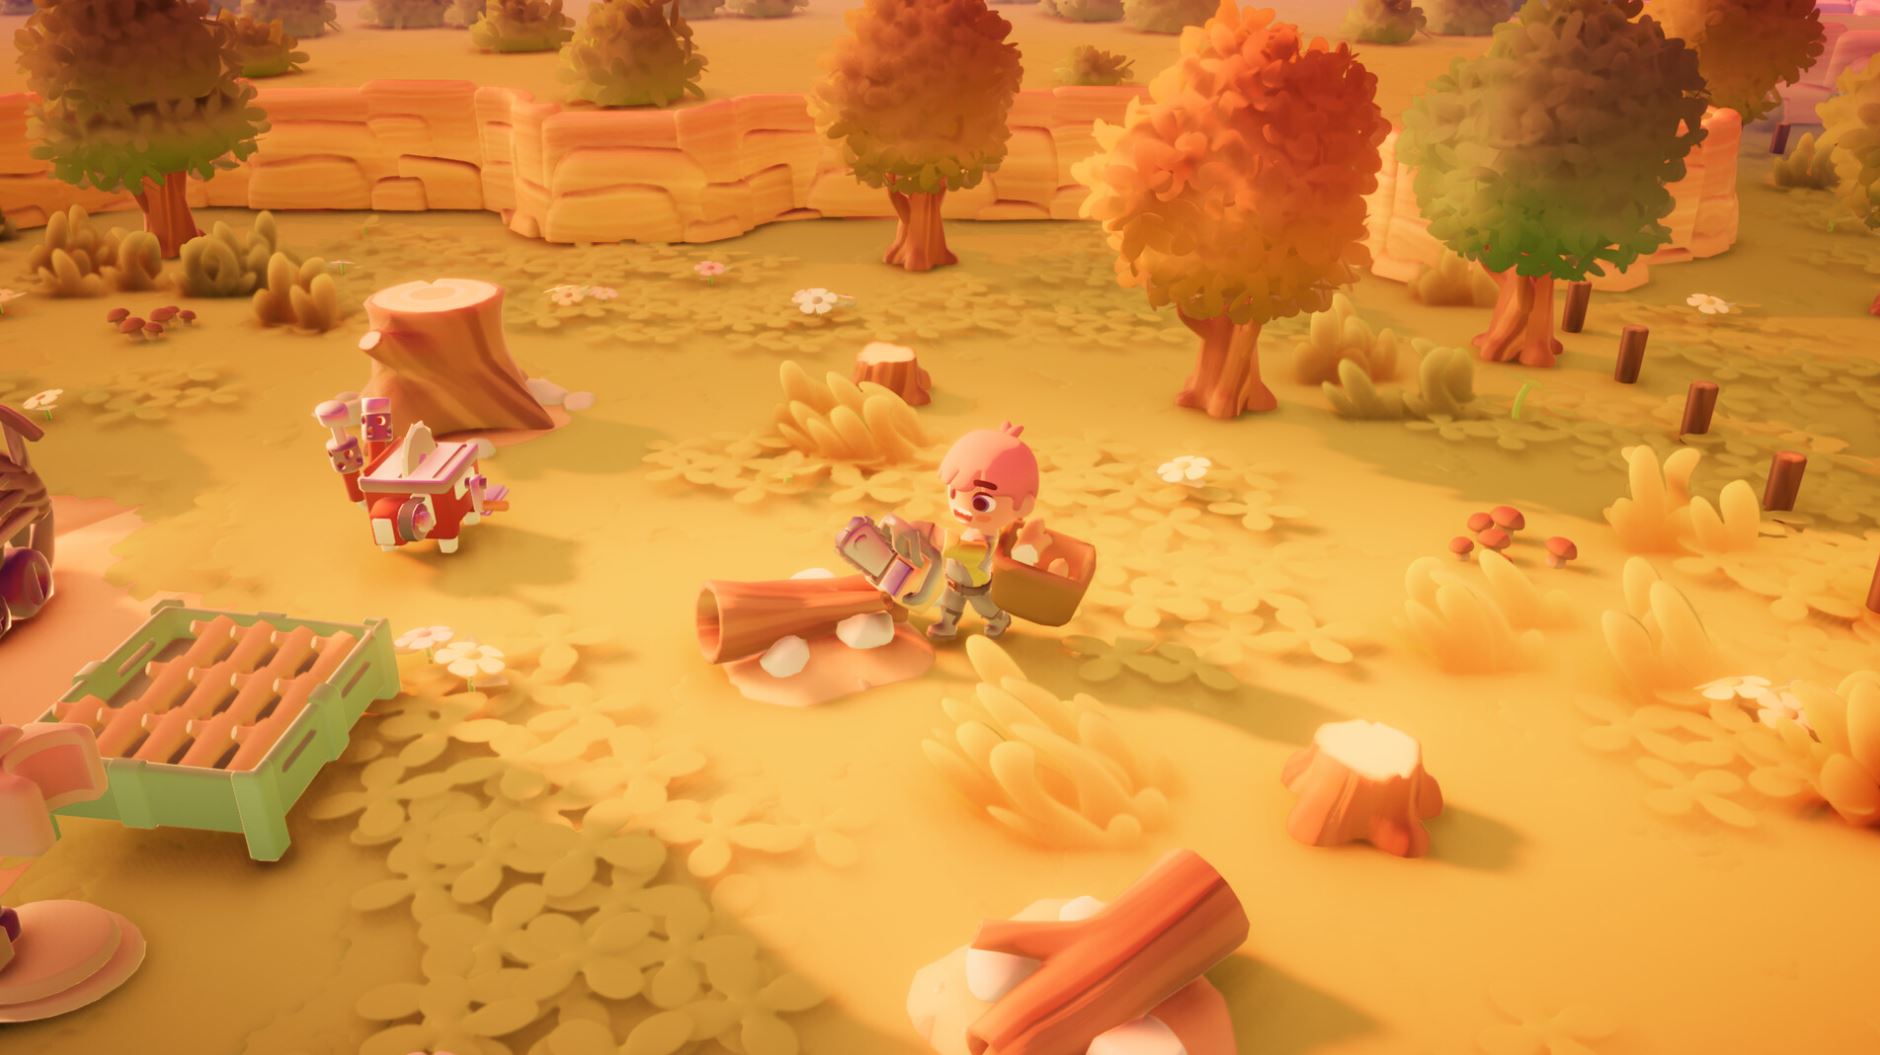 The player character collects wood in Go-Go Town.